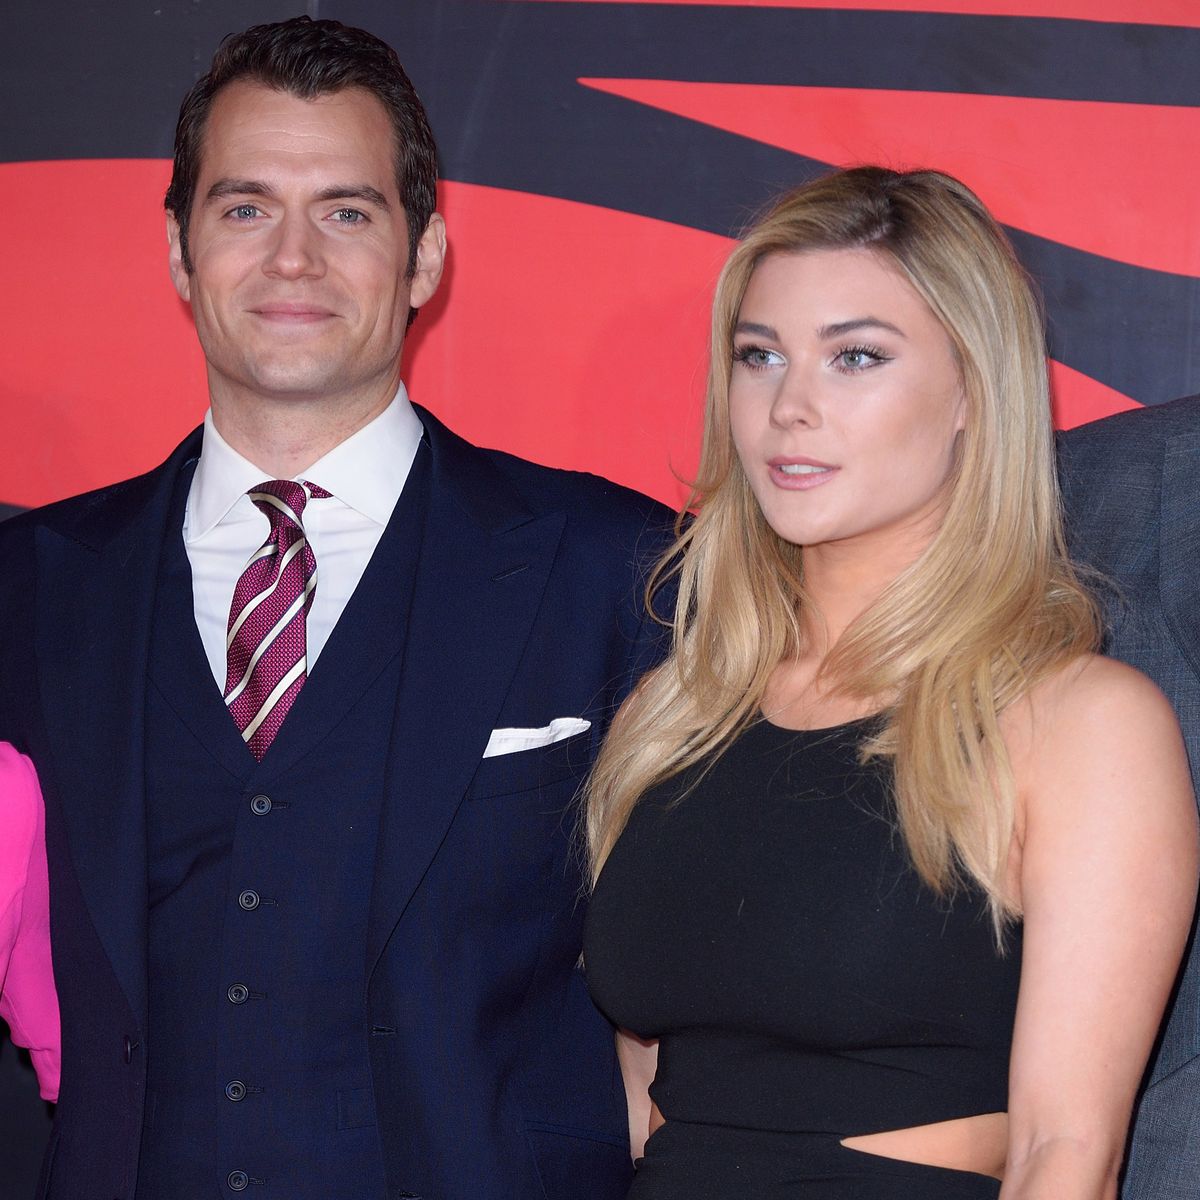 Henry Cavill girlfriend list - From Kaley Cuoco to Tara King and